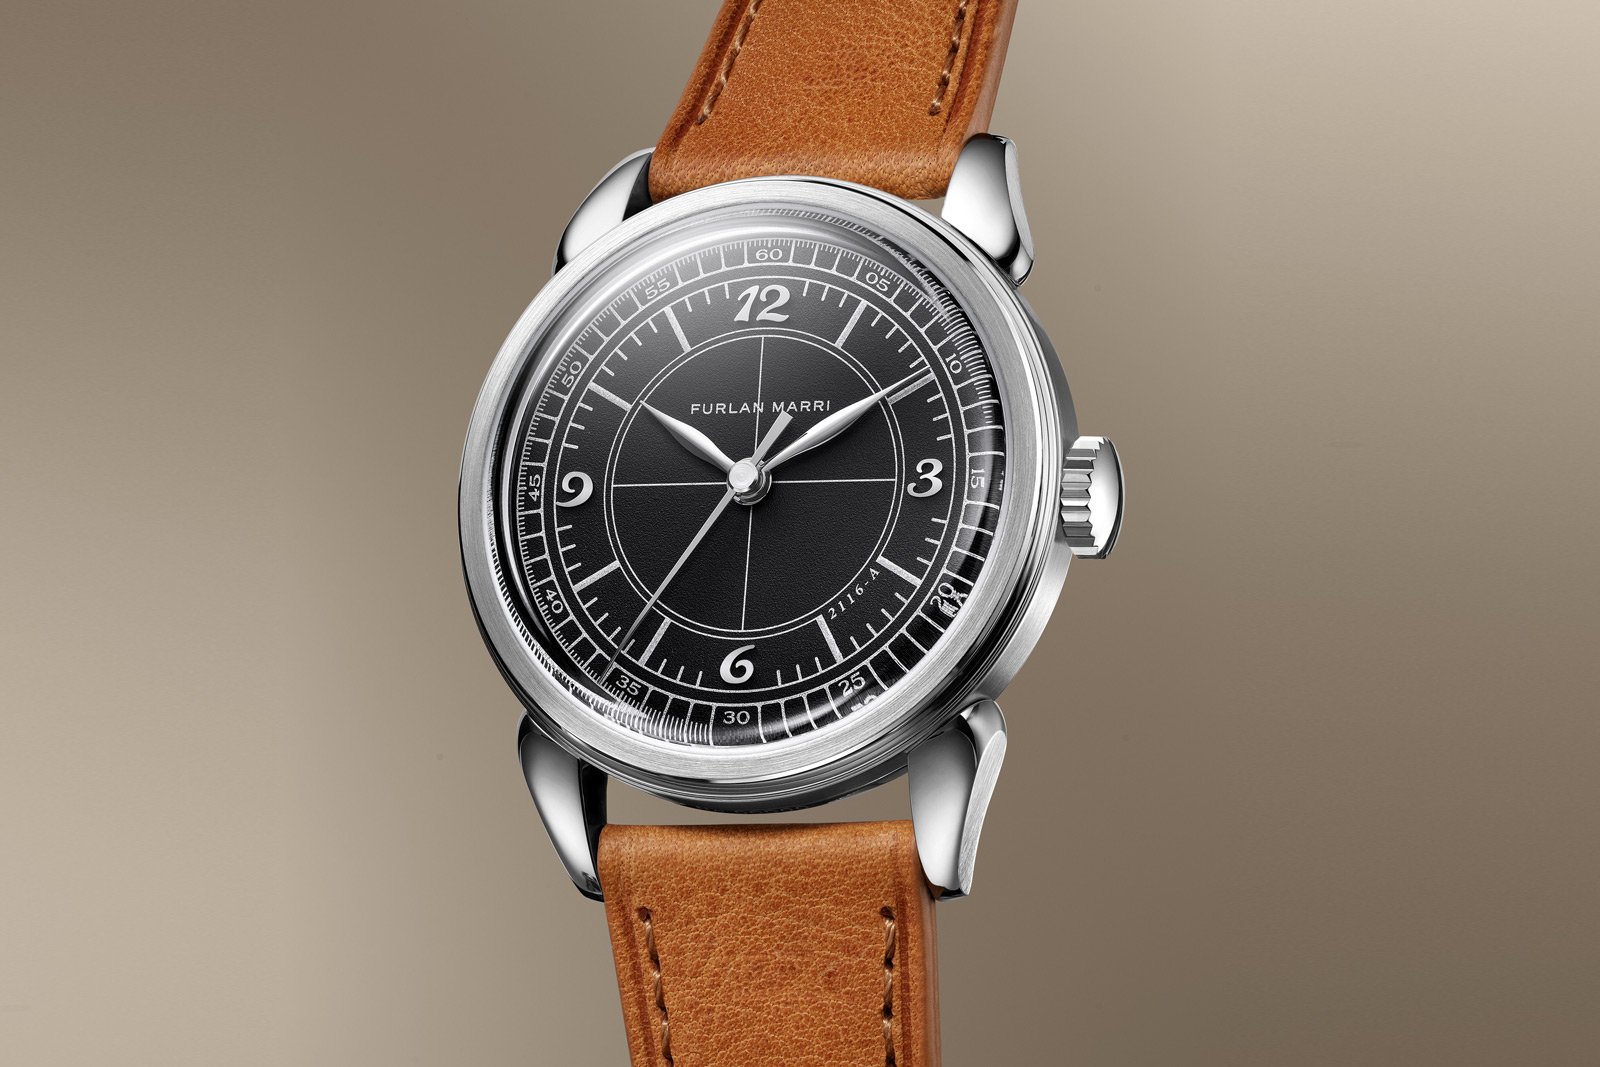 Furlan Marri Introduces the Ref. 2116-A “Sector” Dial Automatic 